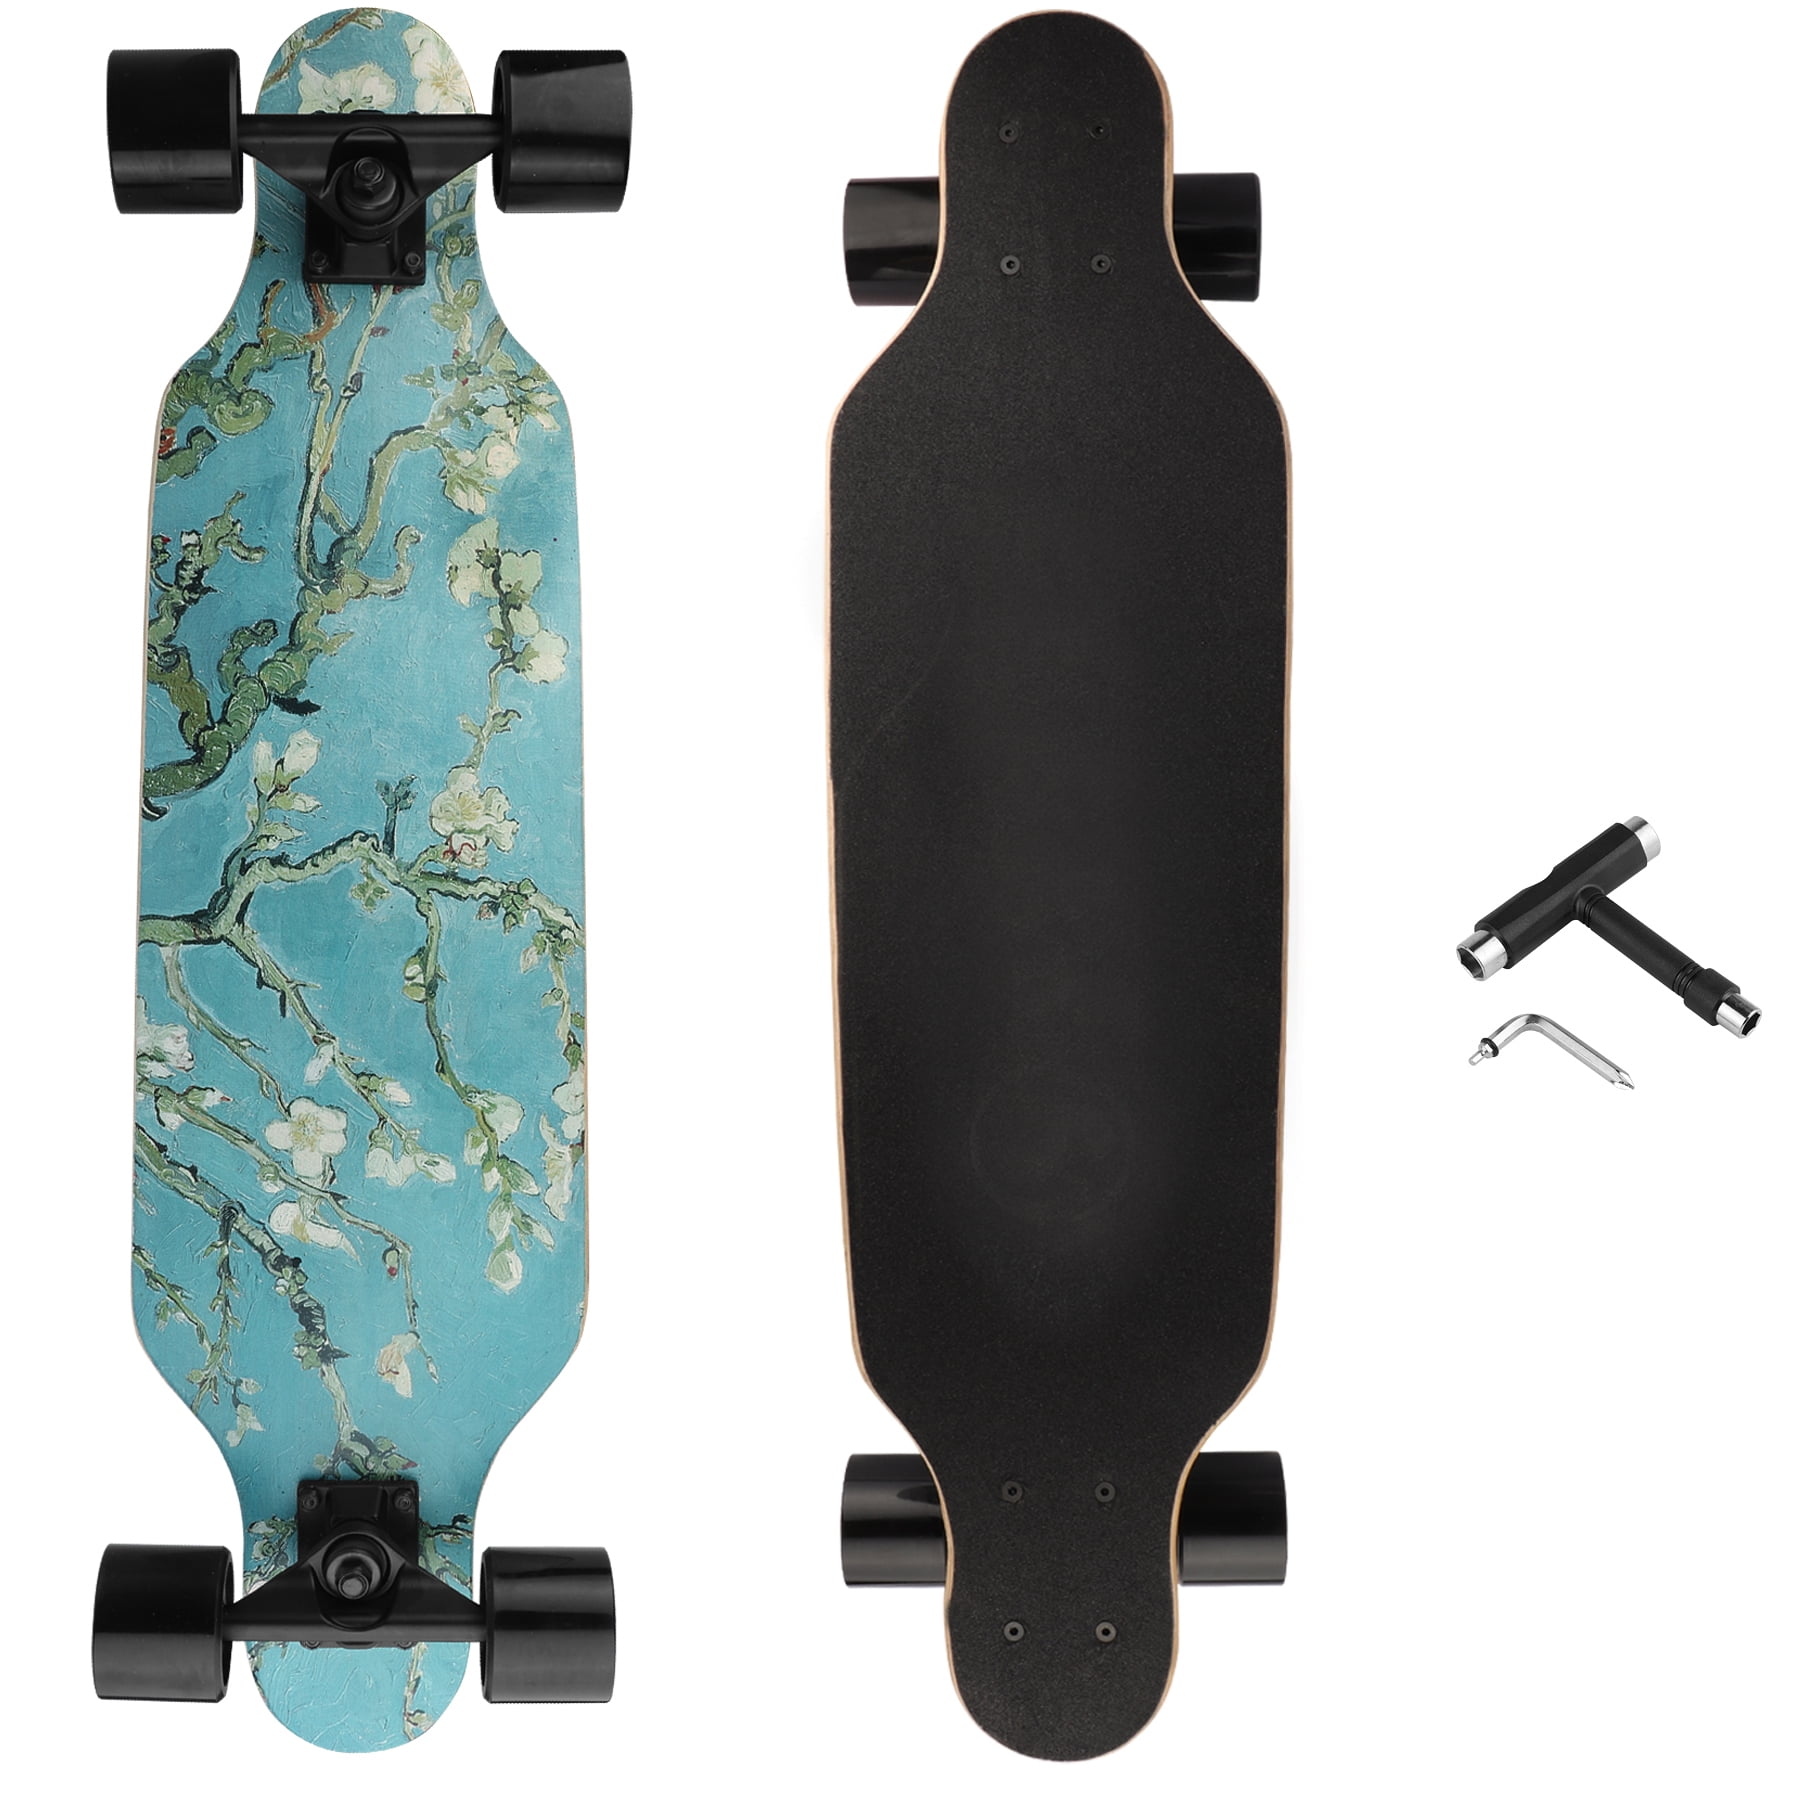 31 Longboard Freestyle Carving Cruising Skateboard 8 Layer Maple T-Tool Included 